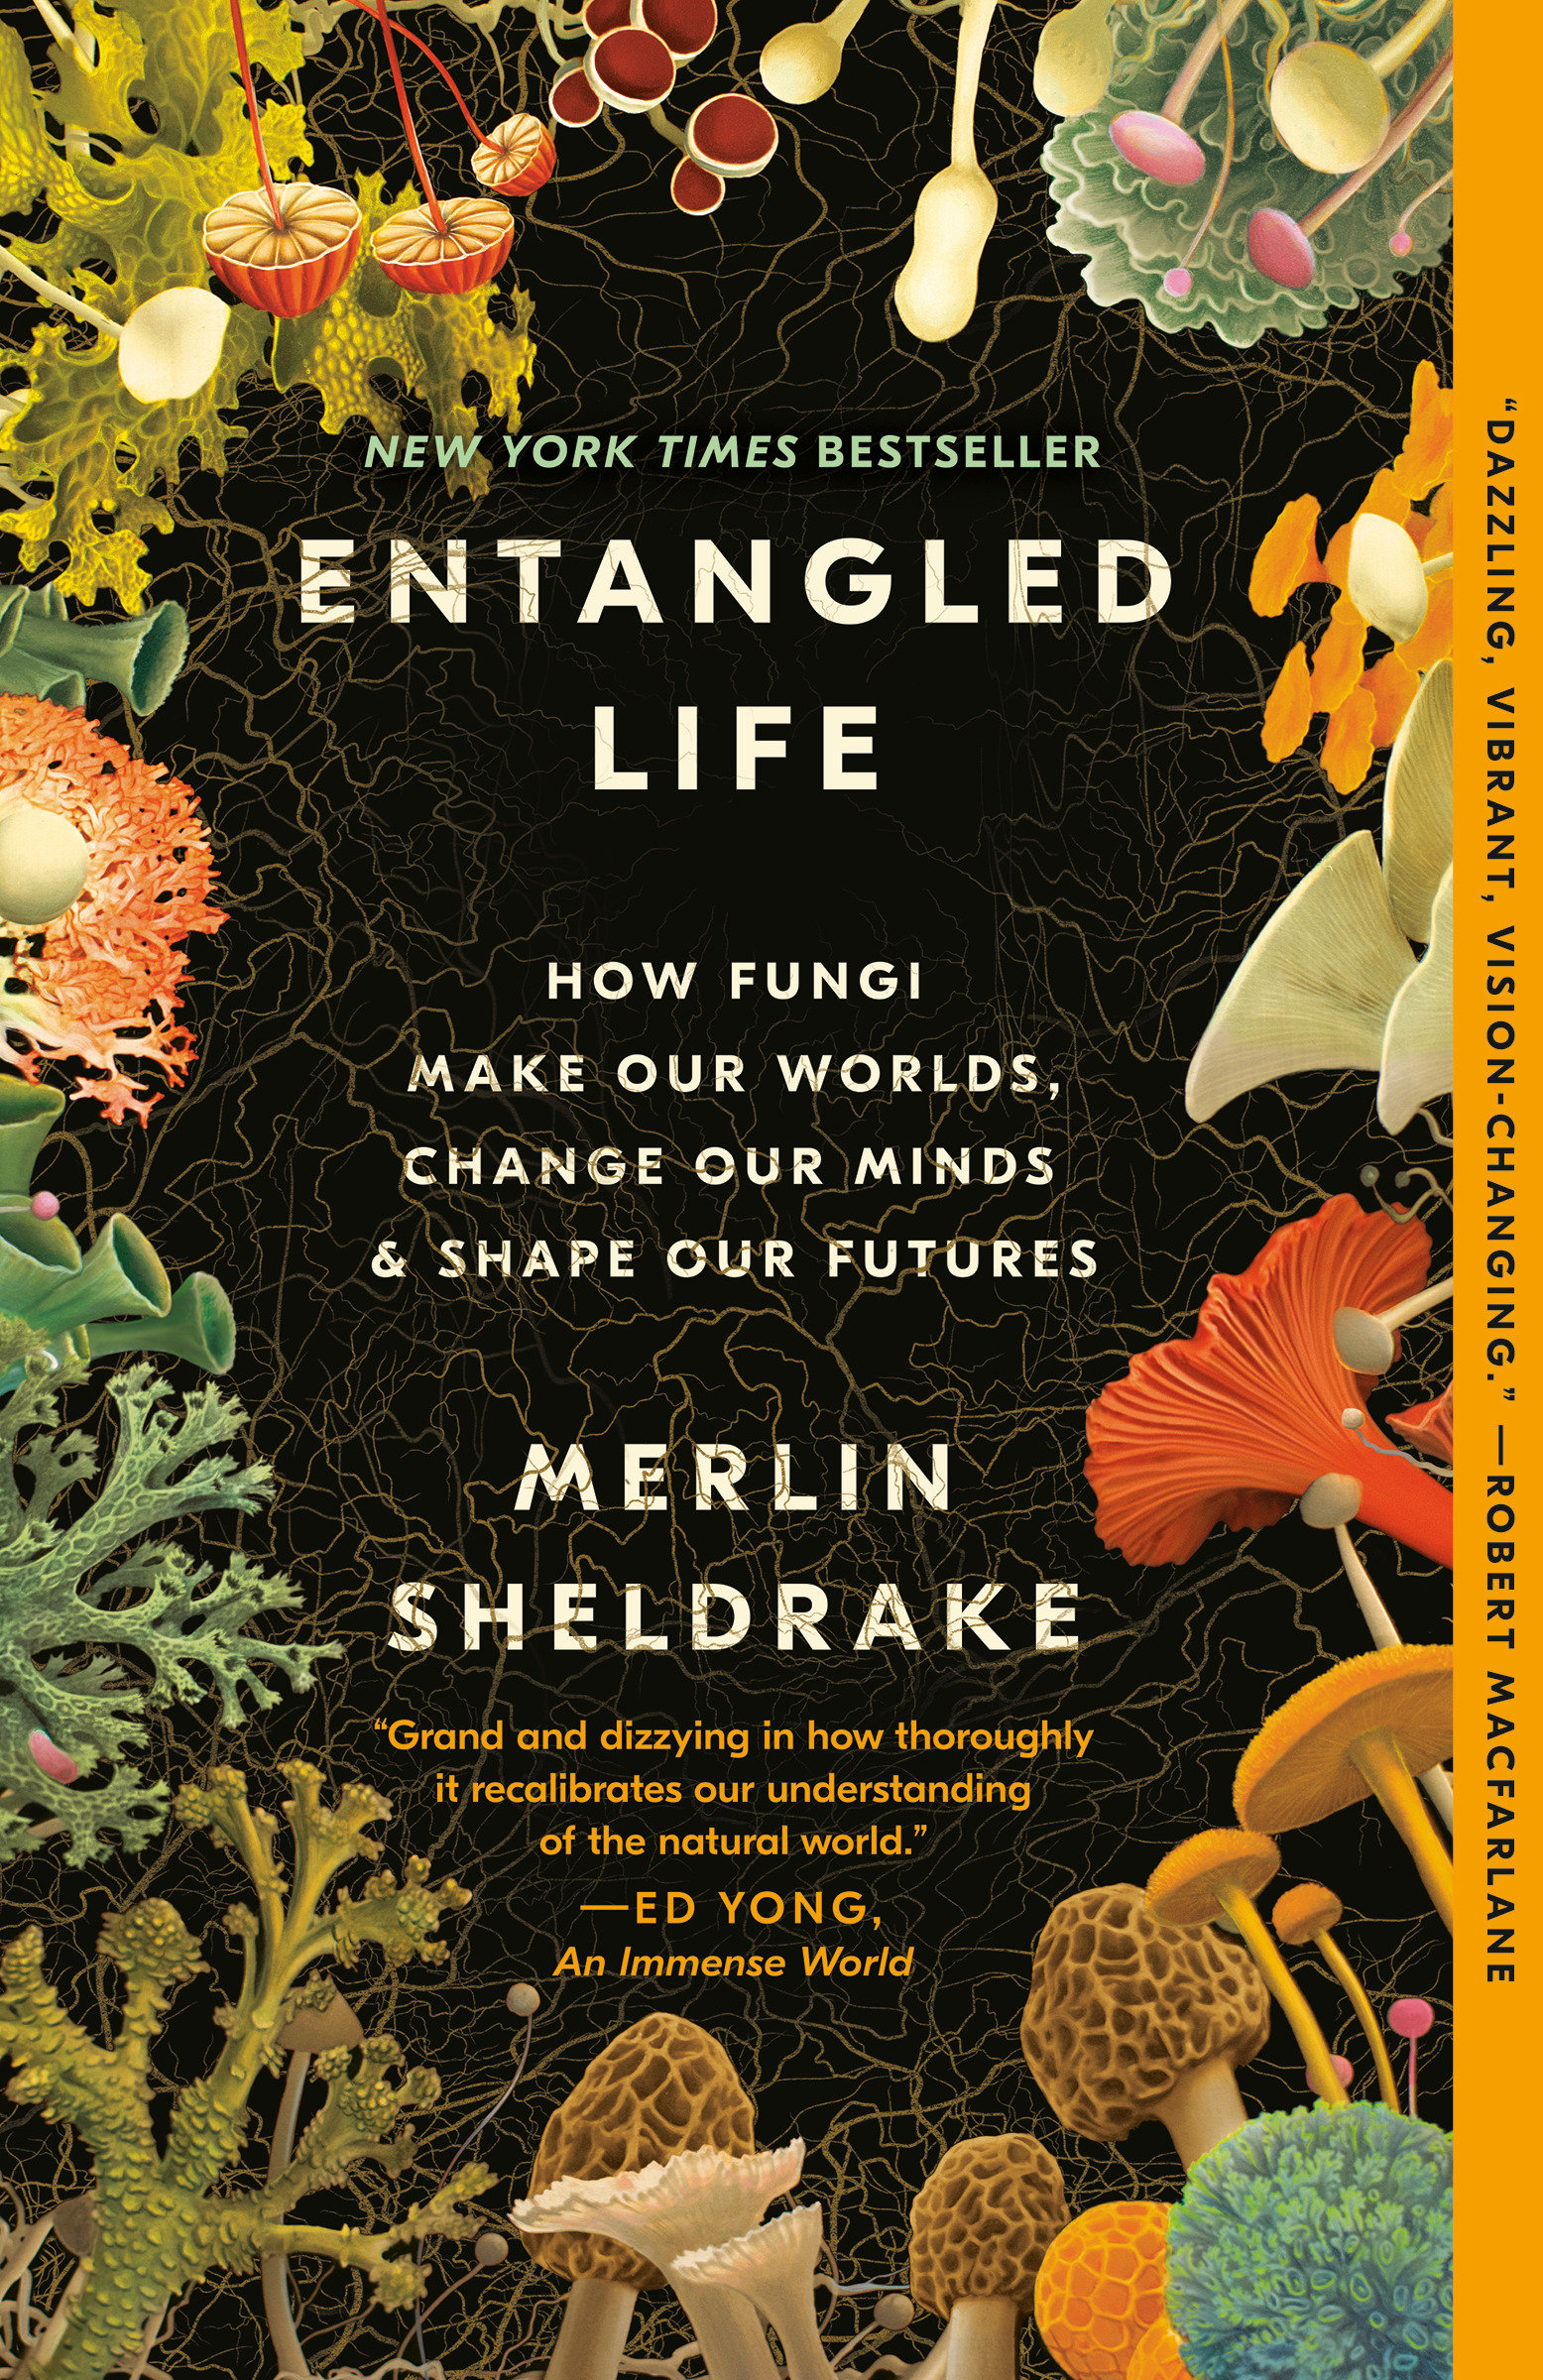 Entangled Life How Fungi Make Our Worlds, Change Our Minds & Shape Our Futures cover image